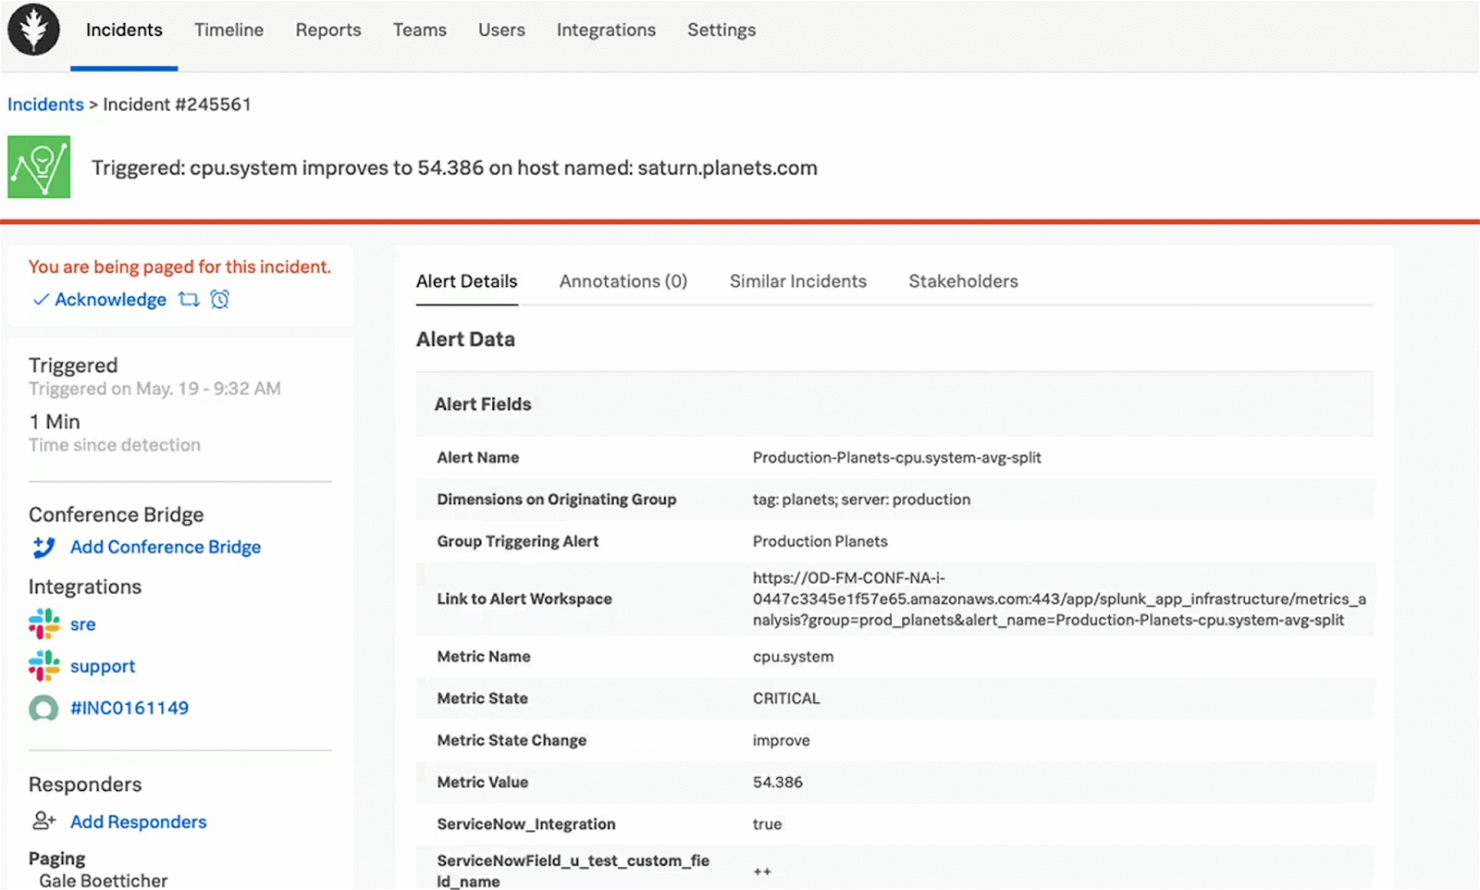 Incident response software Splunk's incident page